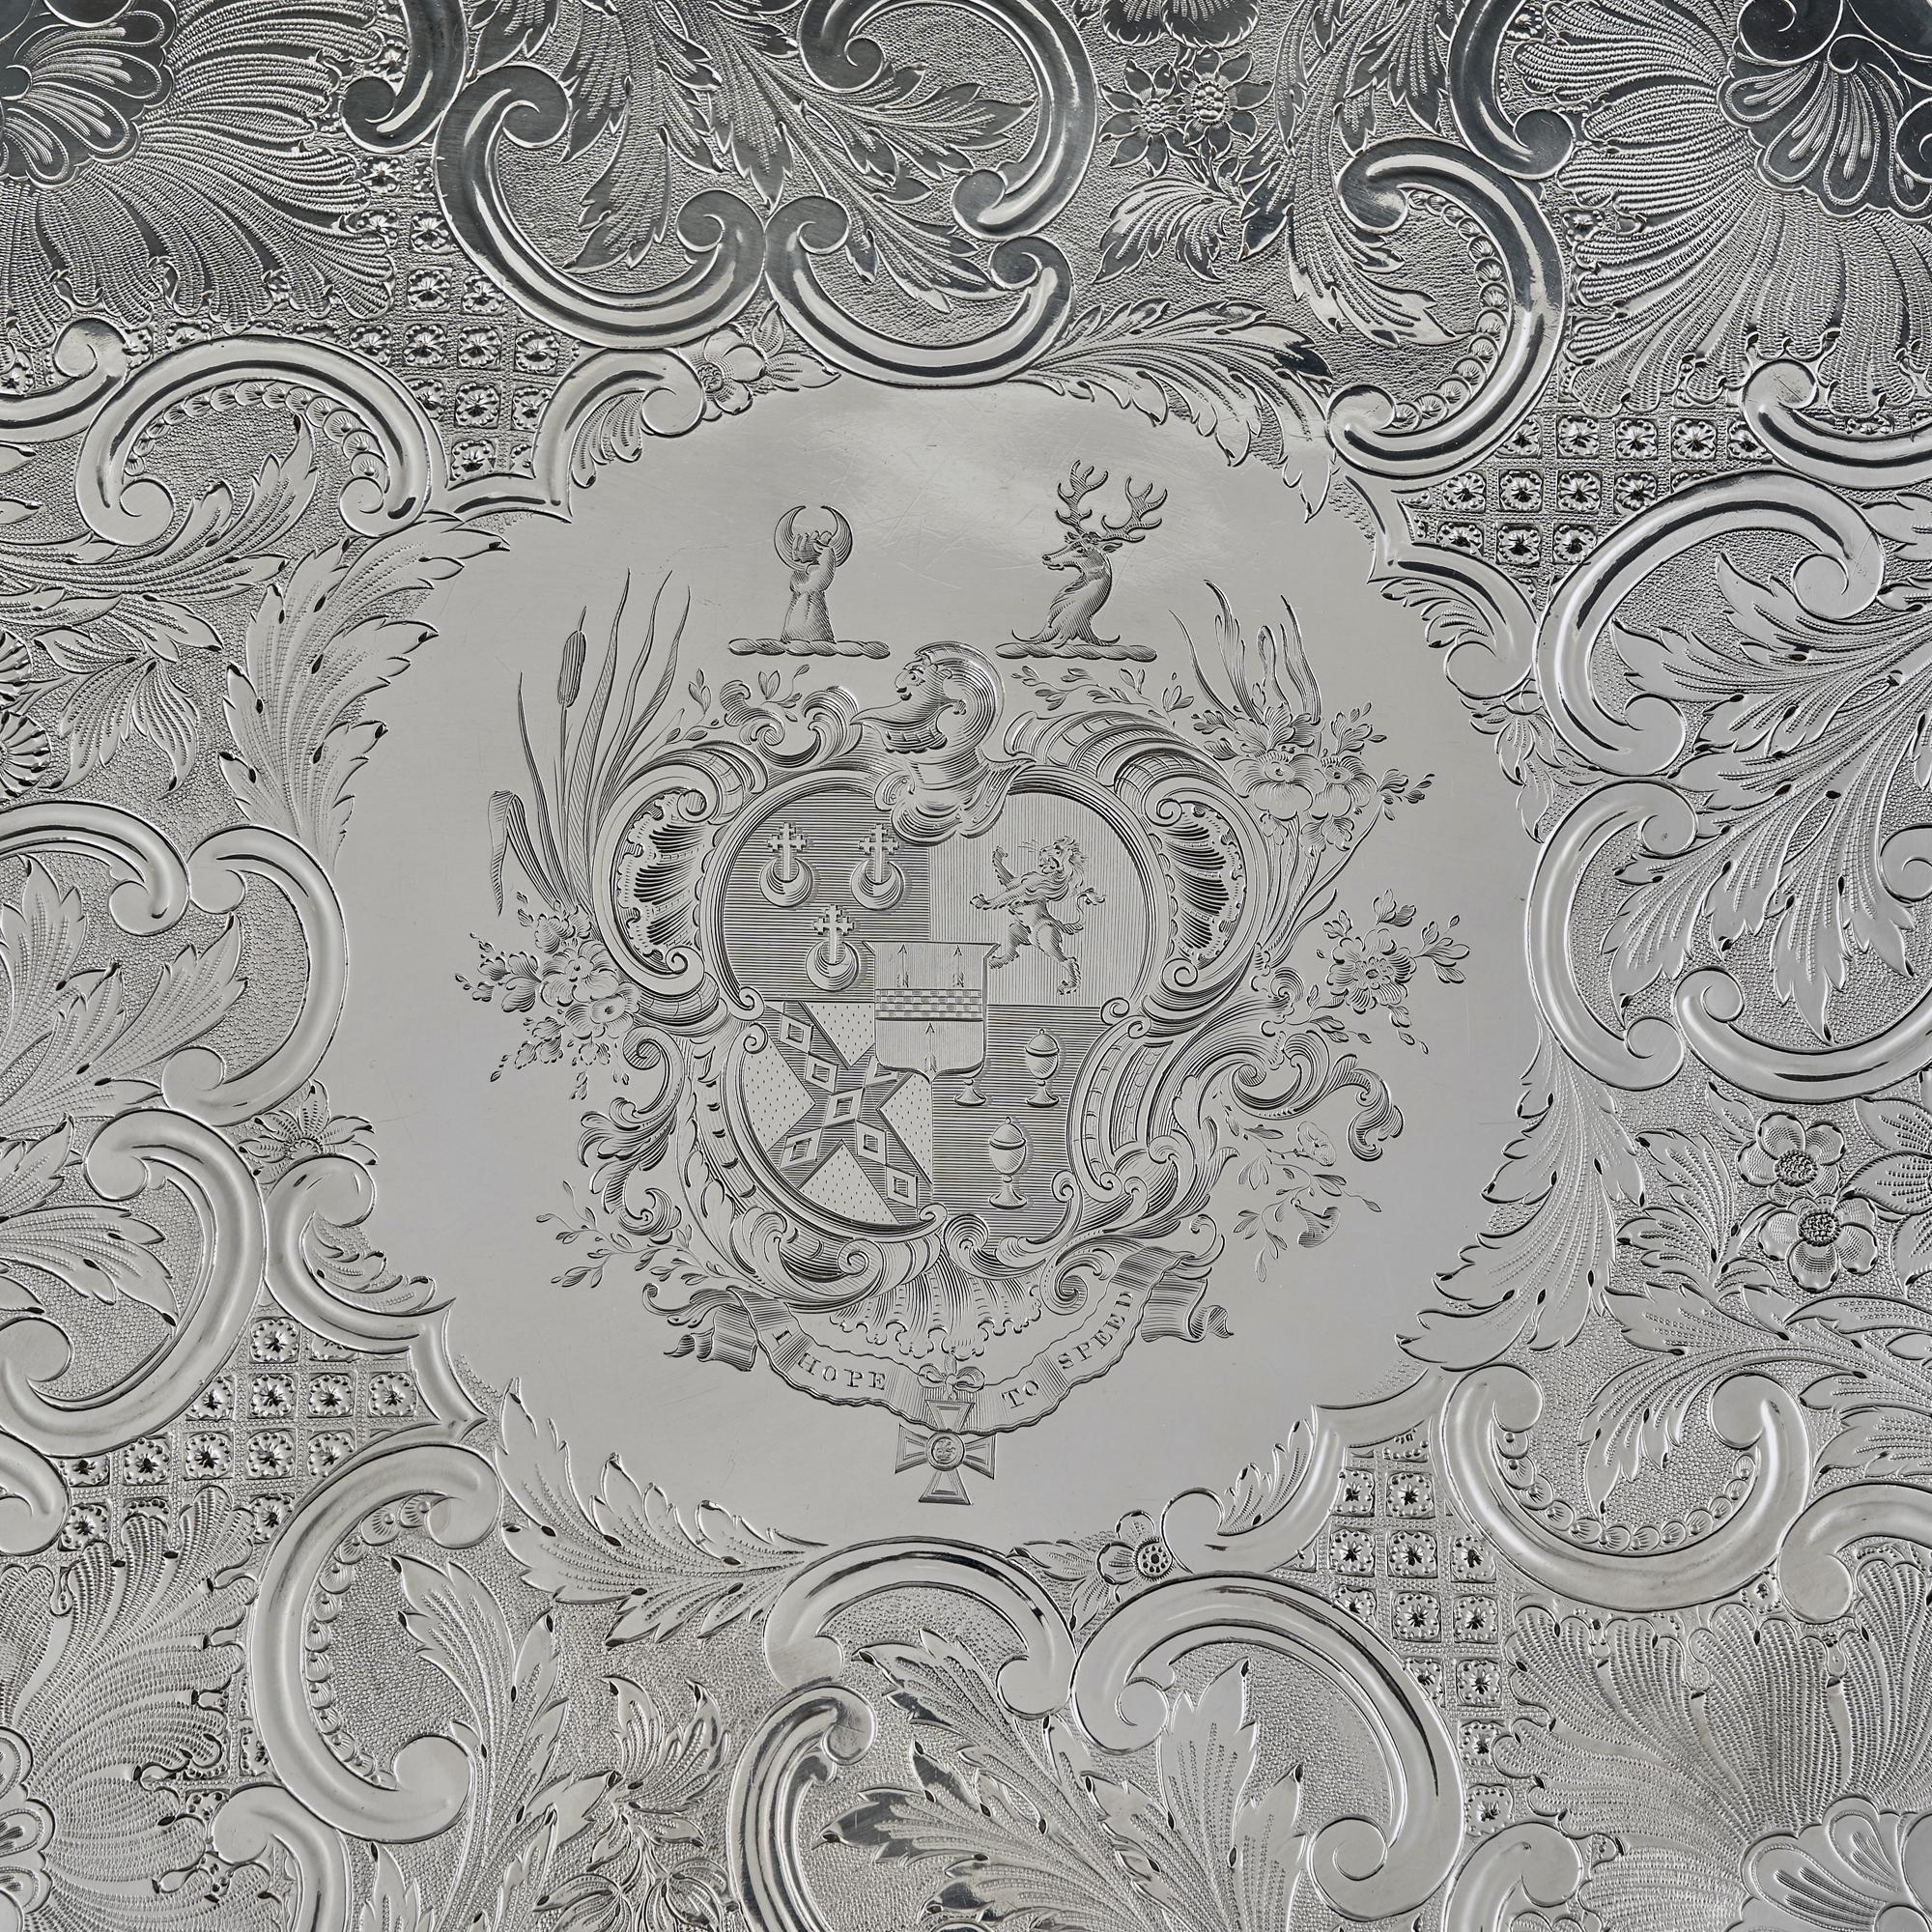 A superb quality antique silver salver  or charger in the highly decorative rococo style. Made during the reign of George IV, this large silver salver has a cast openwork border finely detailed with both chinoiserie decorations and bacchanalian